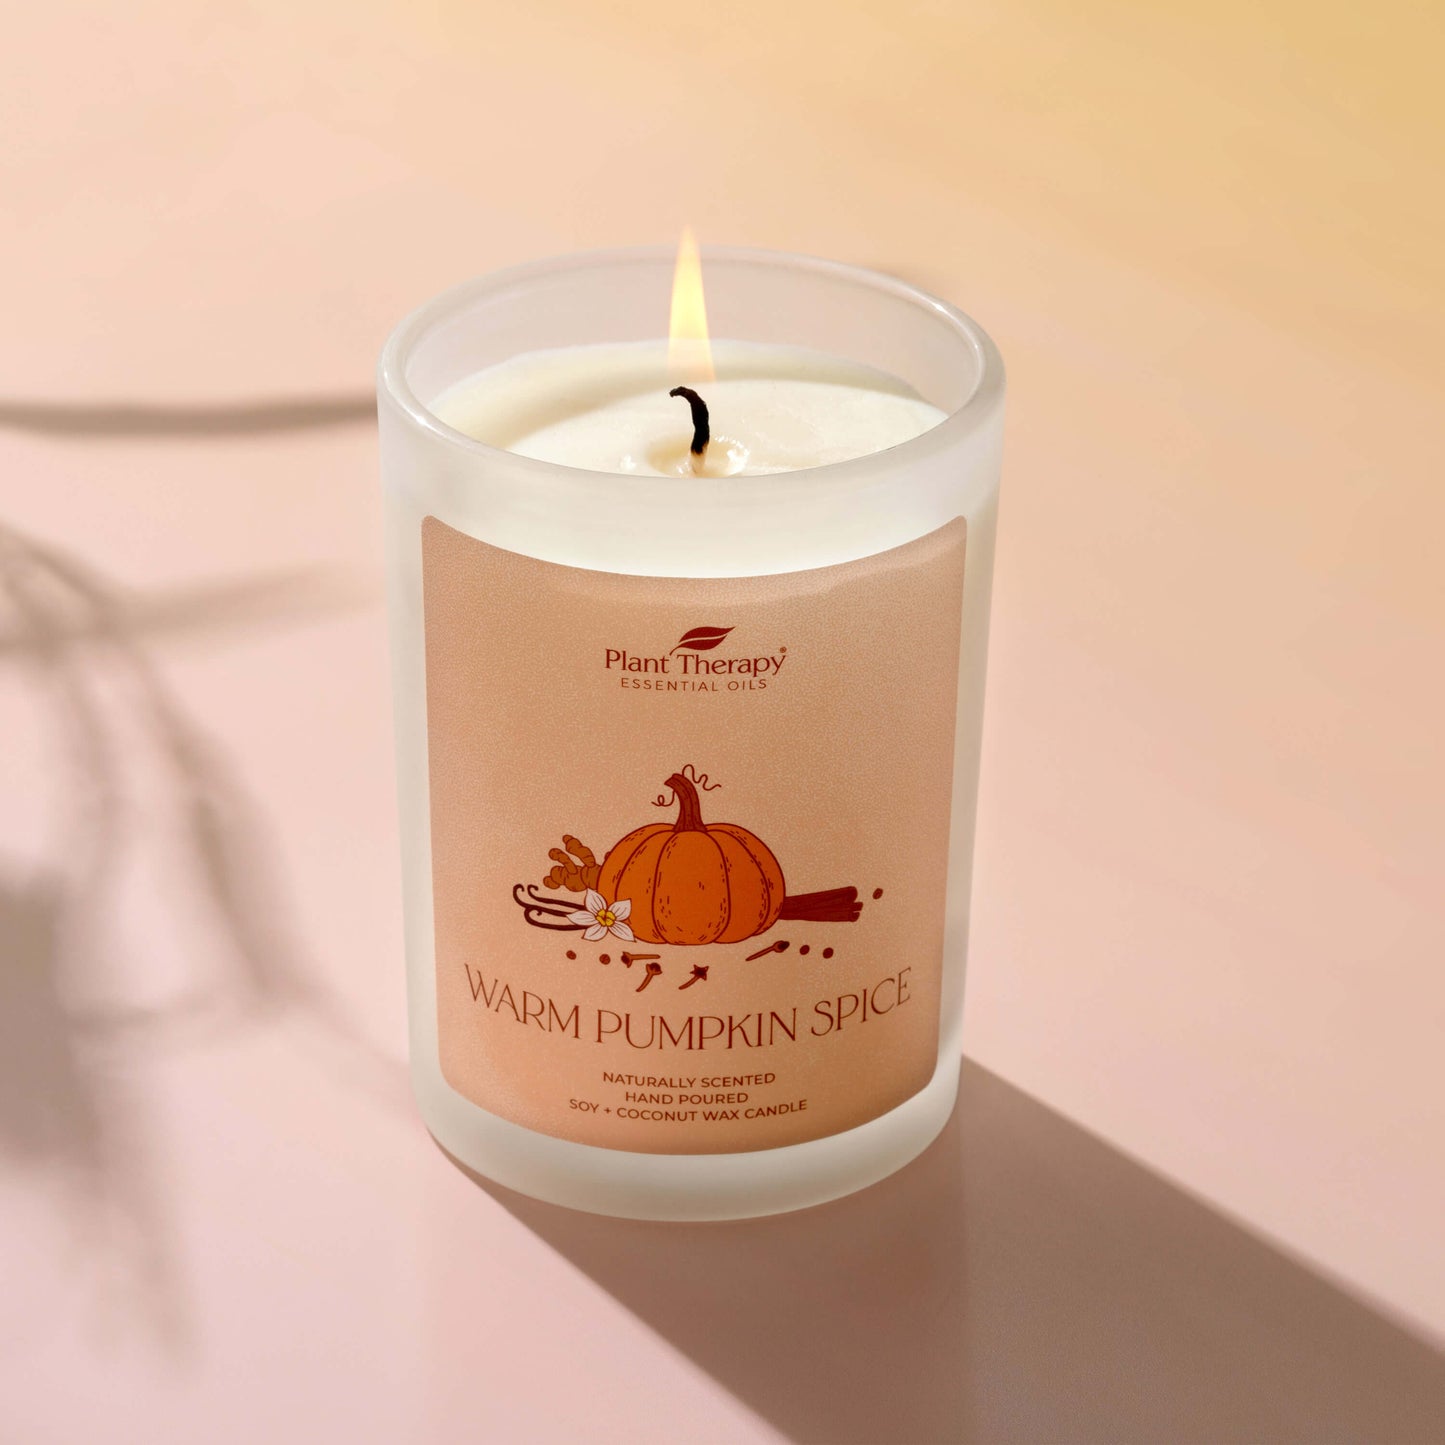 Warm Pumpkin Spice Naturally Scented Candle